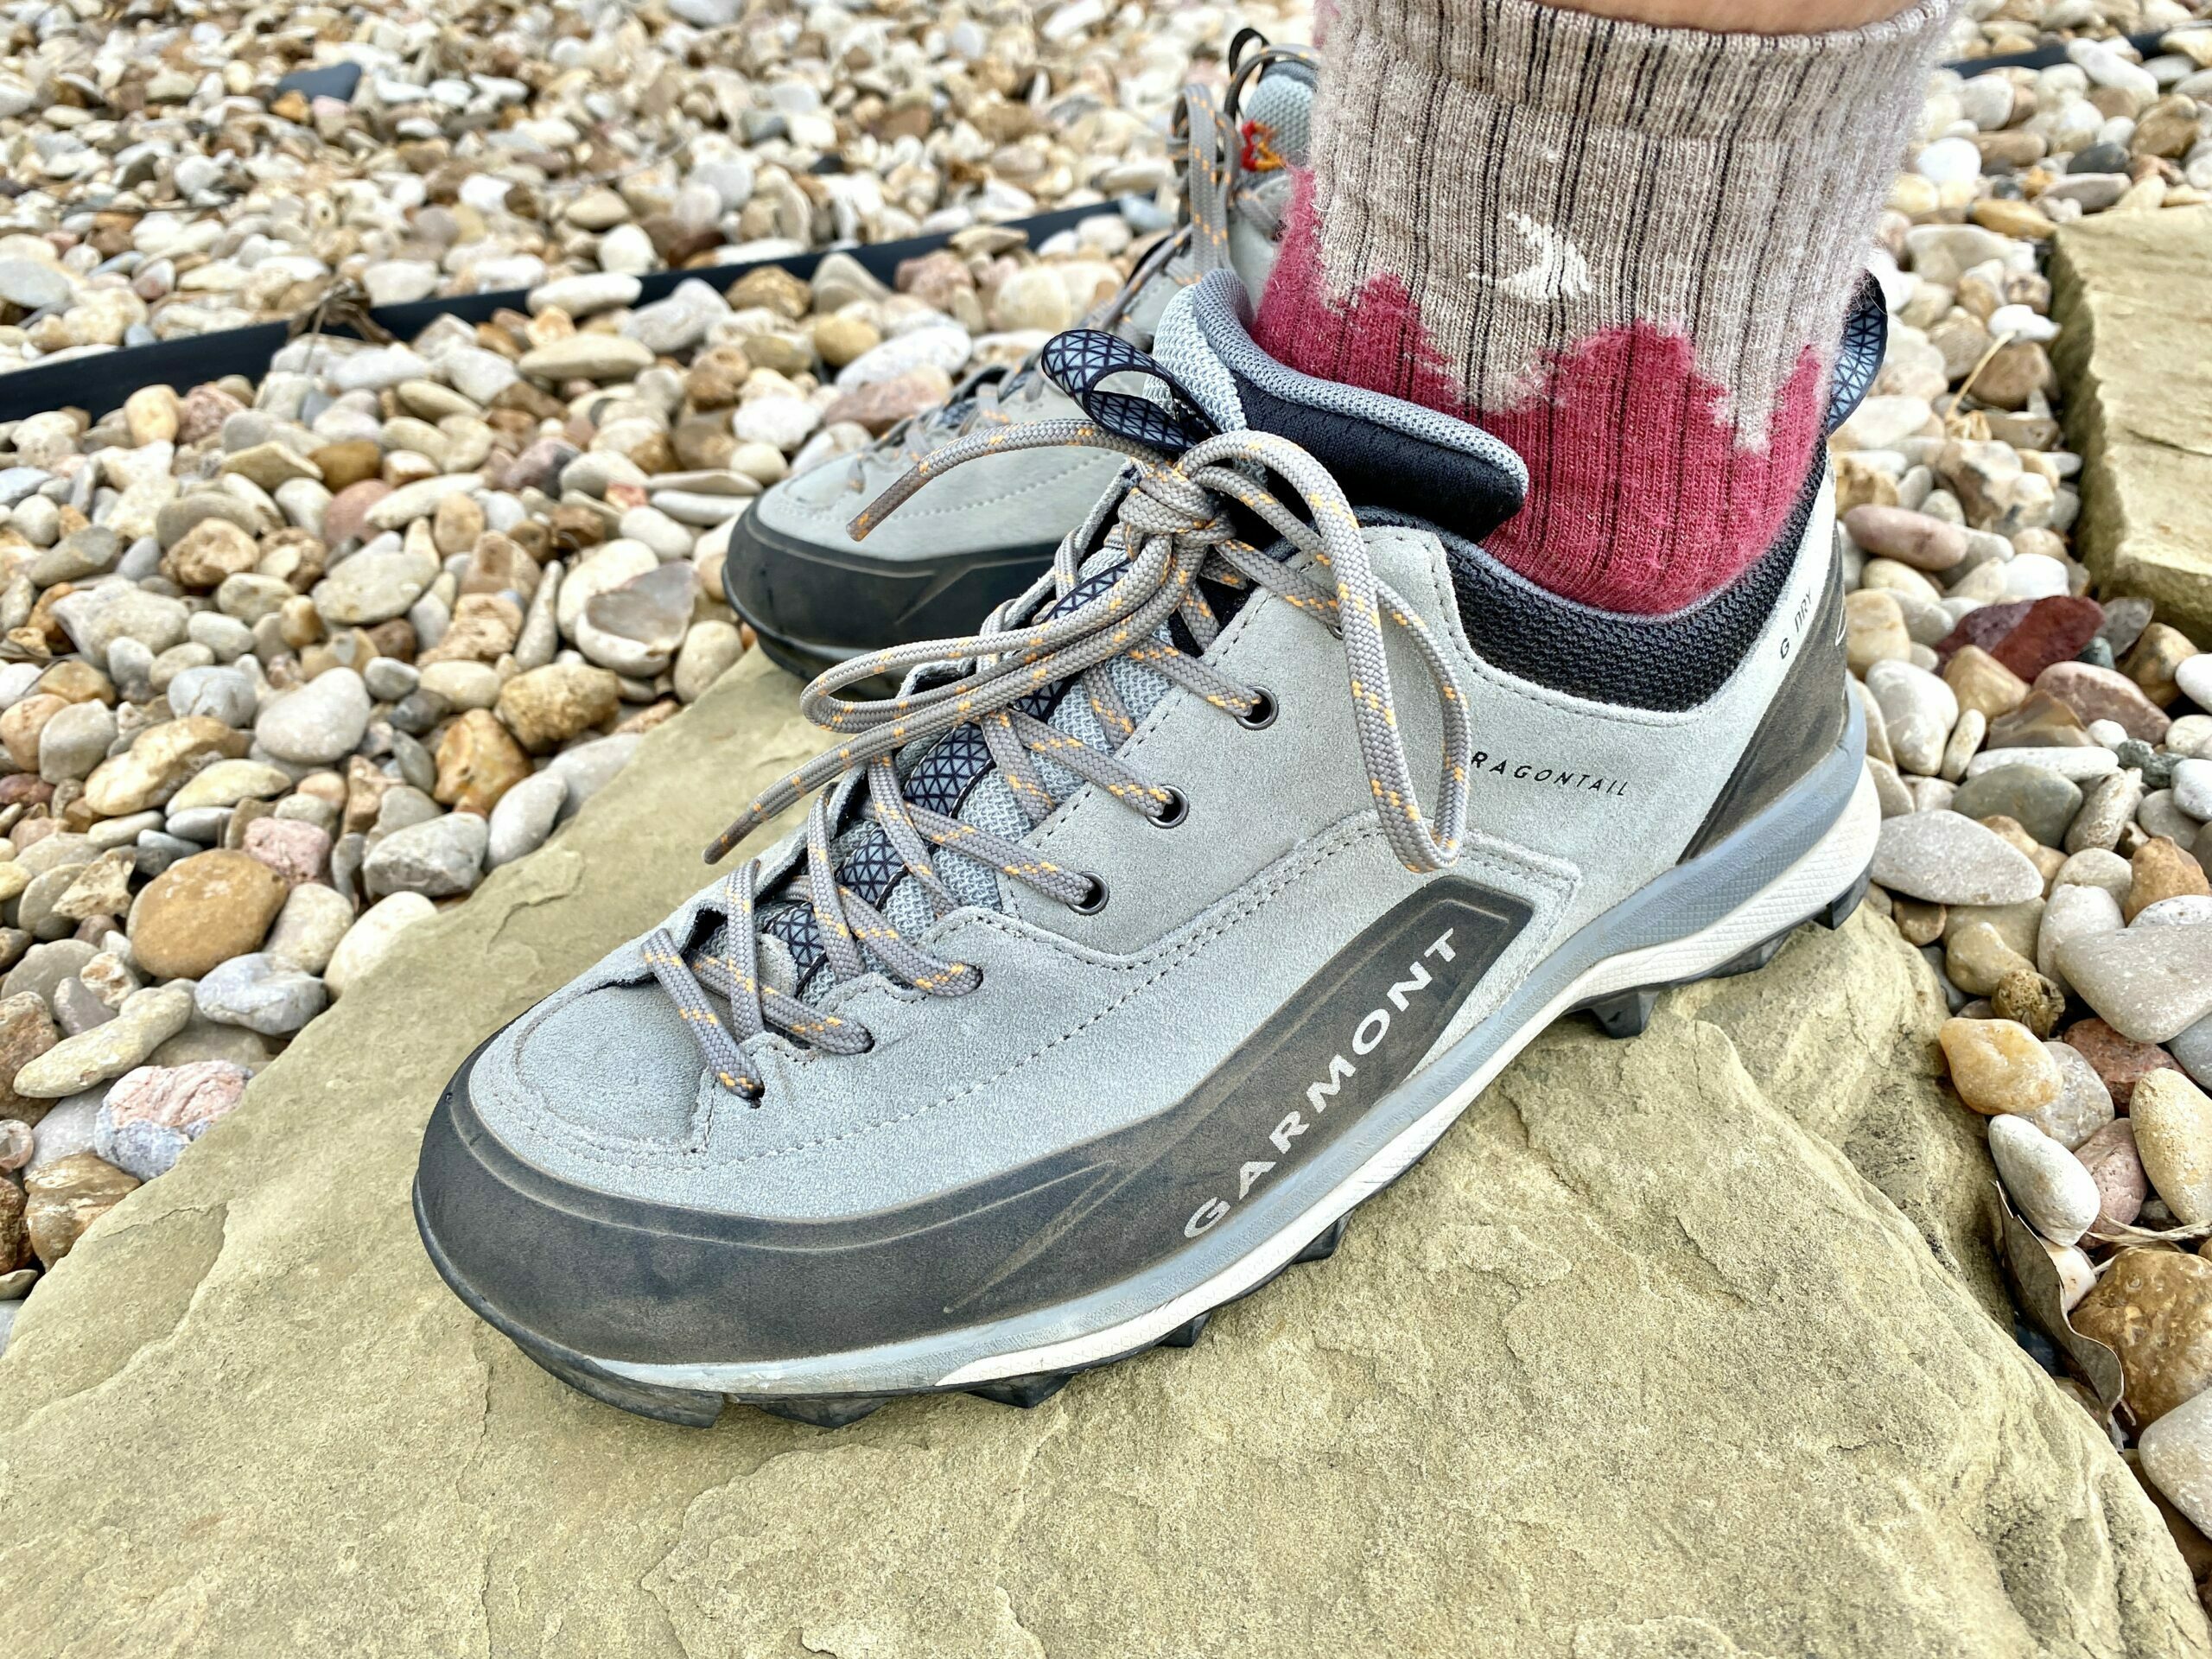 GARMONT Dragontail G Dry Hiking Shoes Review